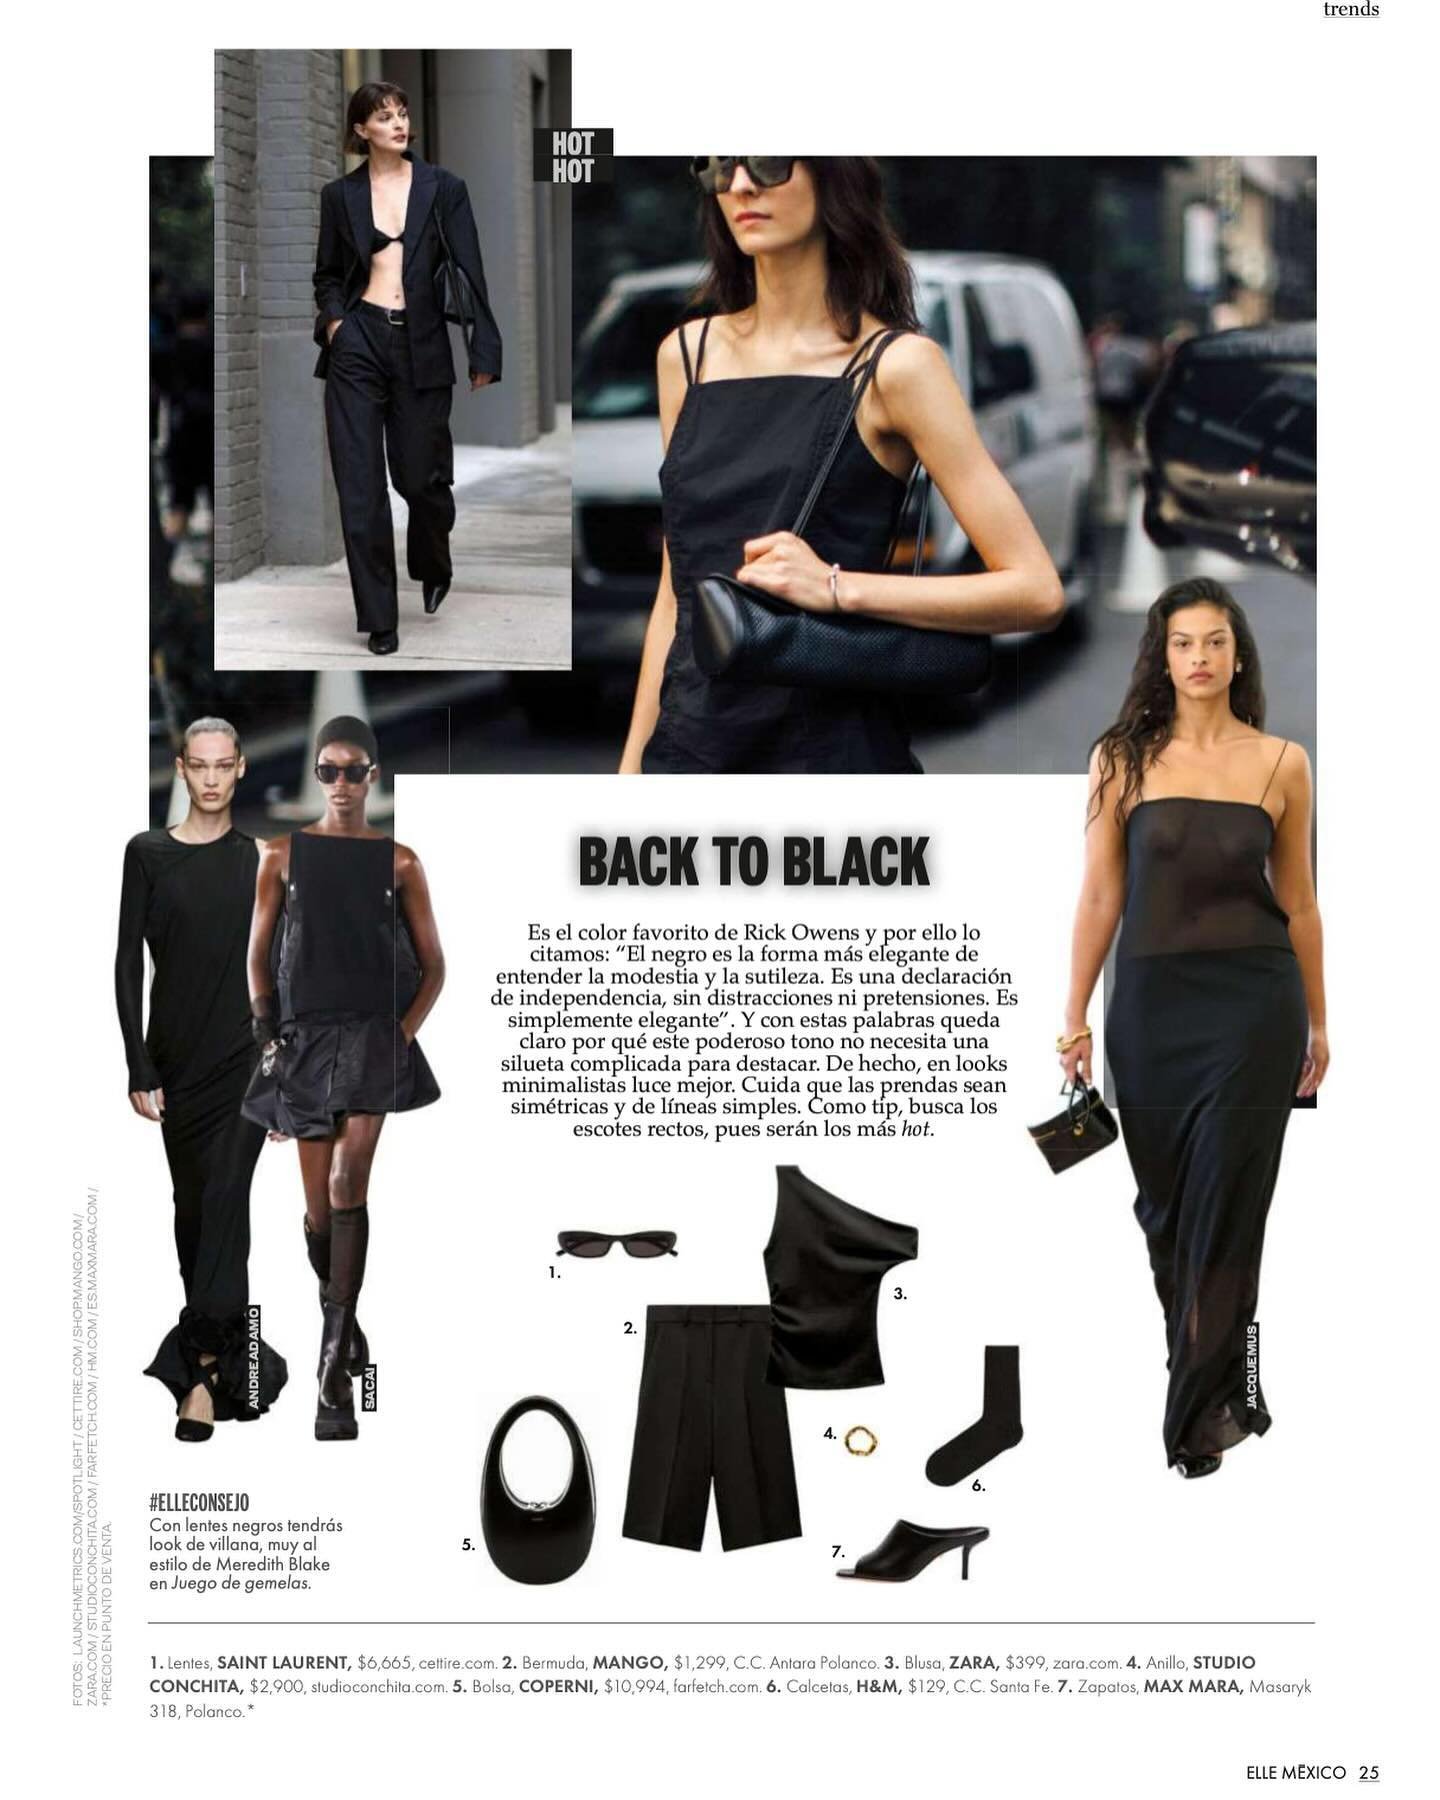 Wearing full black but with a onda ring in gold 🖤✨💍 

Thank you for the feature in @elle_mexico may 
@jess.en.ingless 
@candanoclau 
@jimmy.her_ 

#studioconchita #magic #mexico #handcrafted #talisman #enchanted #powerful #shopnow #jewelrylovers #u